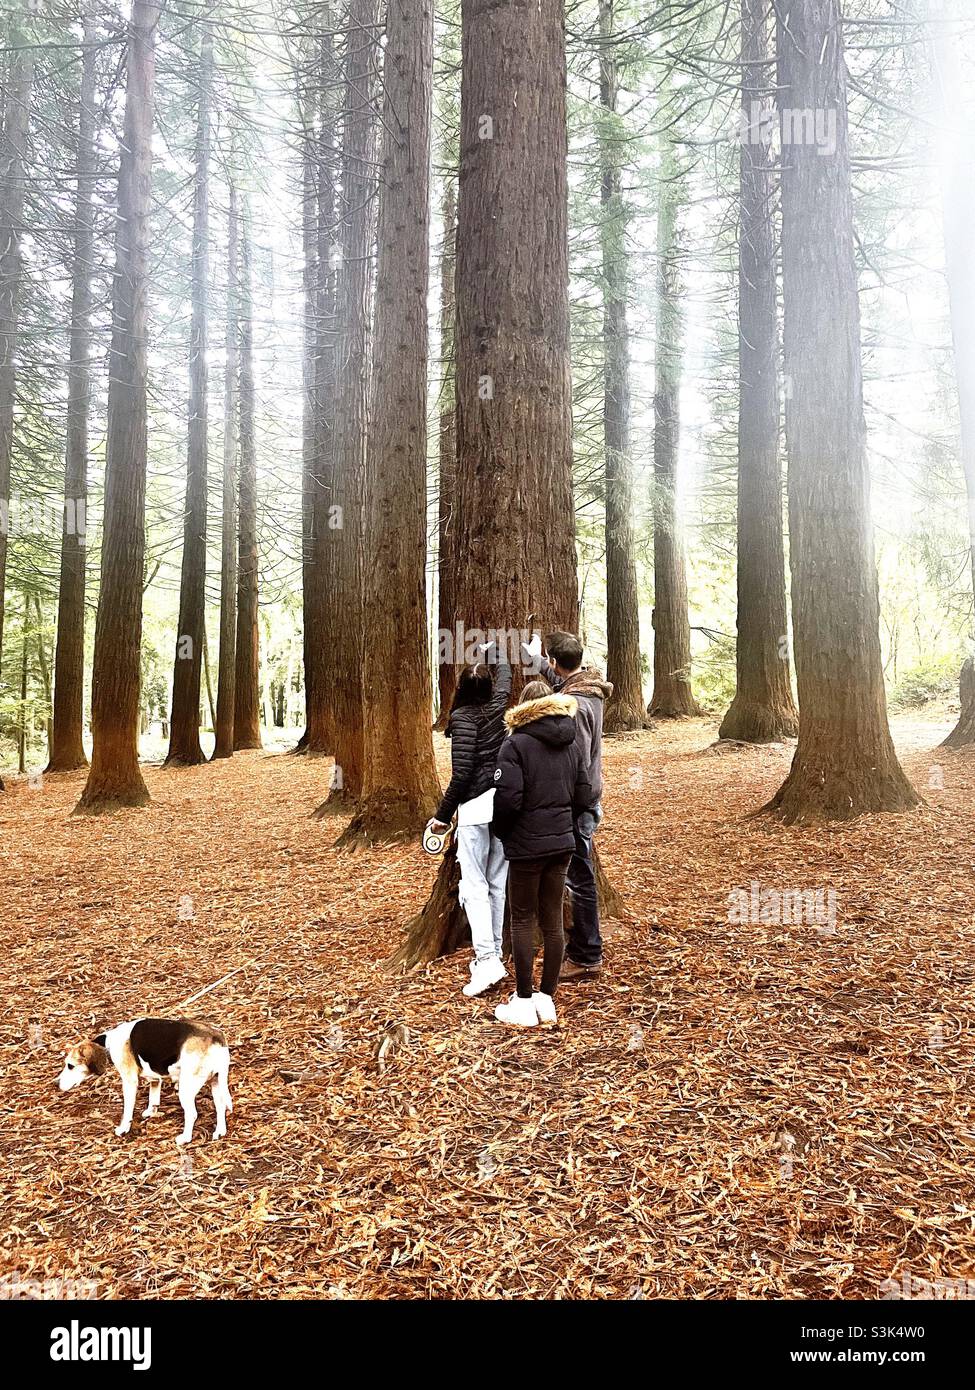 A family touches a tree with unusual bark Stock Photo